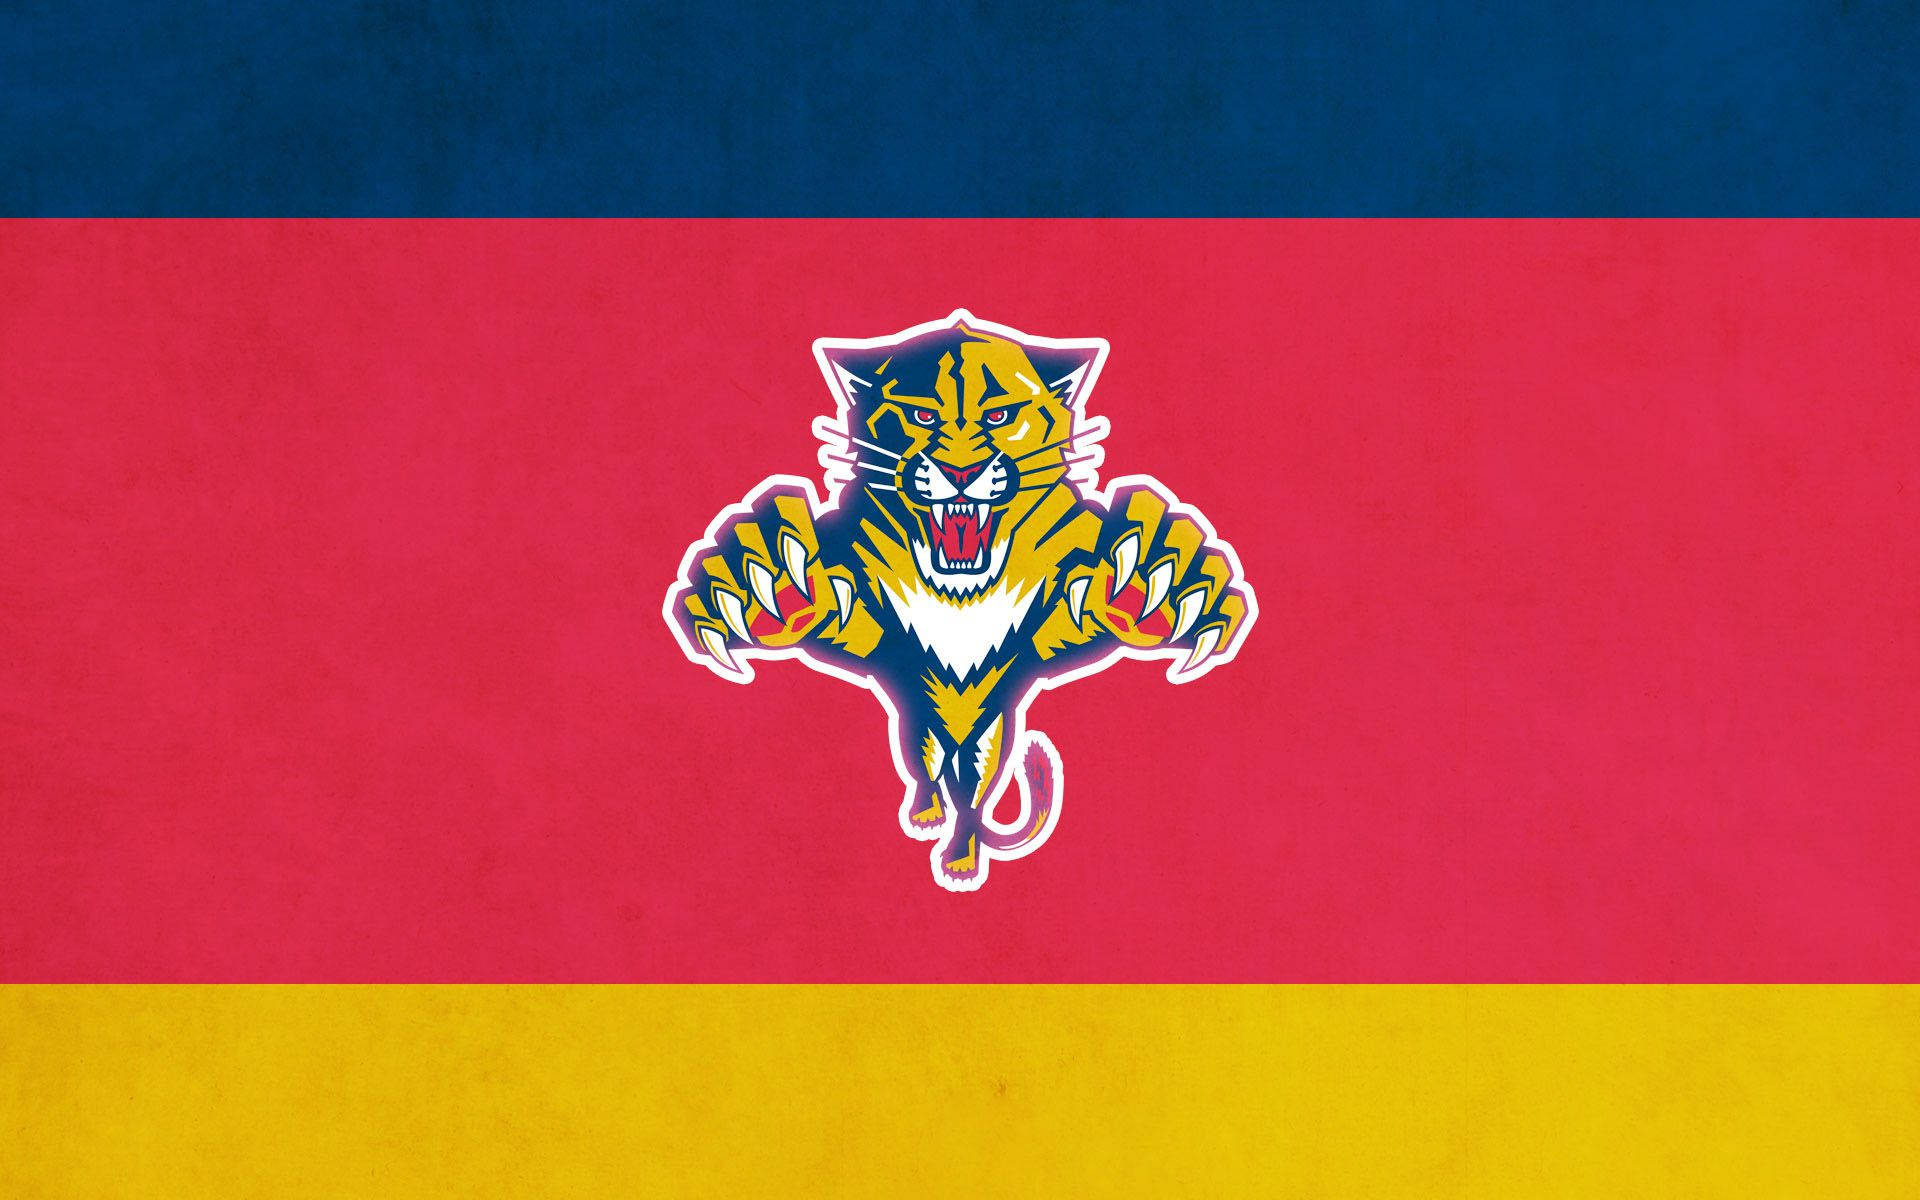 Florida Panthers Leaping Panther Background